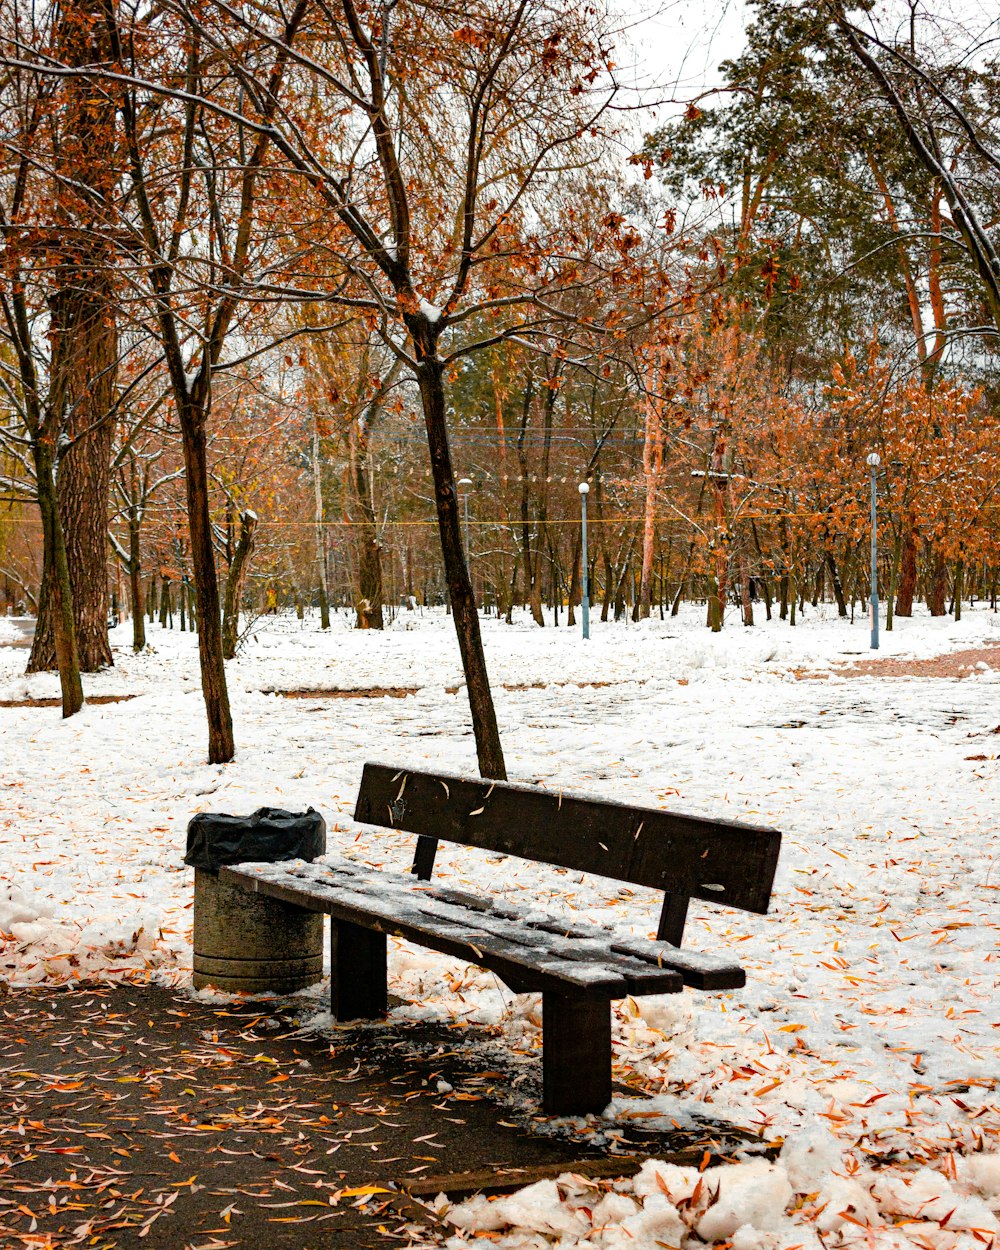 a park bench in the middle of a snowy park